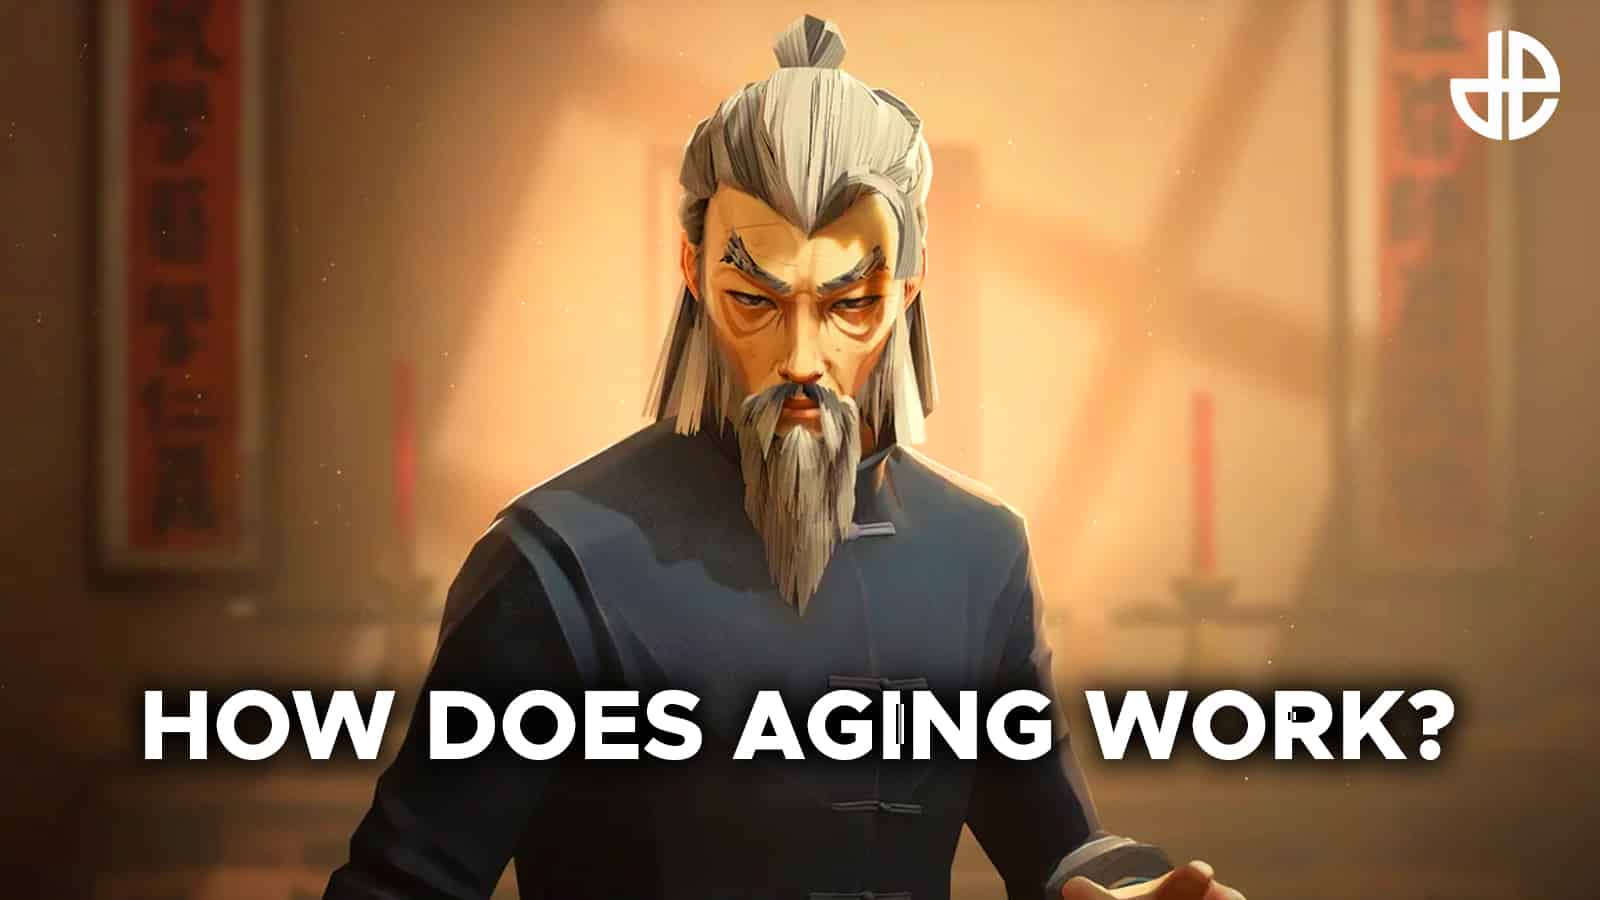 An image of Sifu's character aging